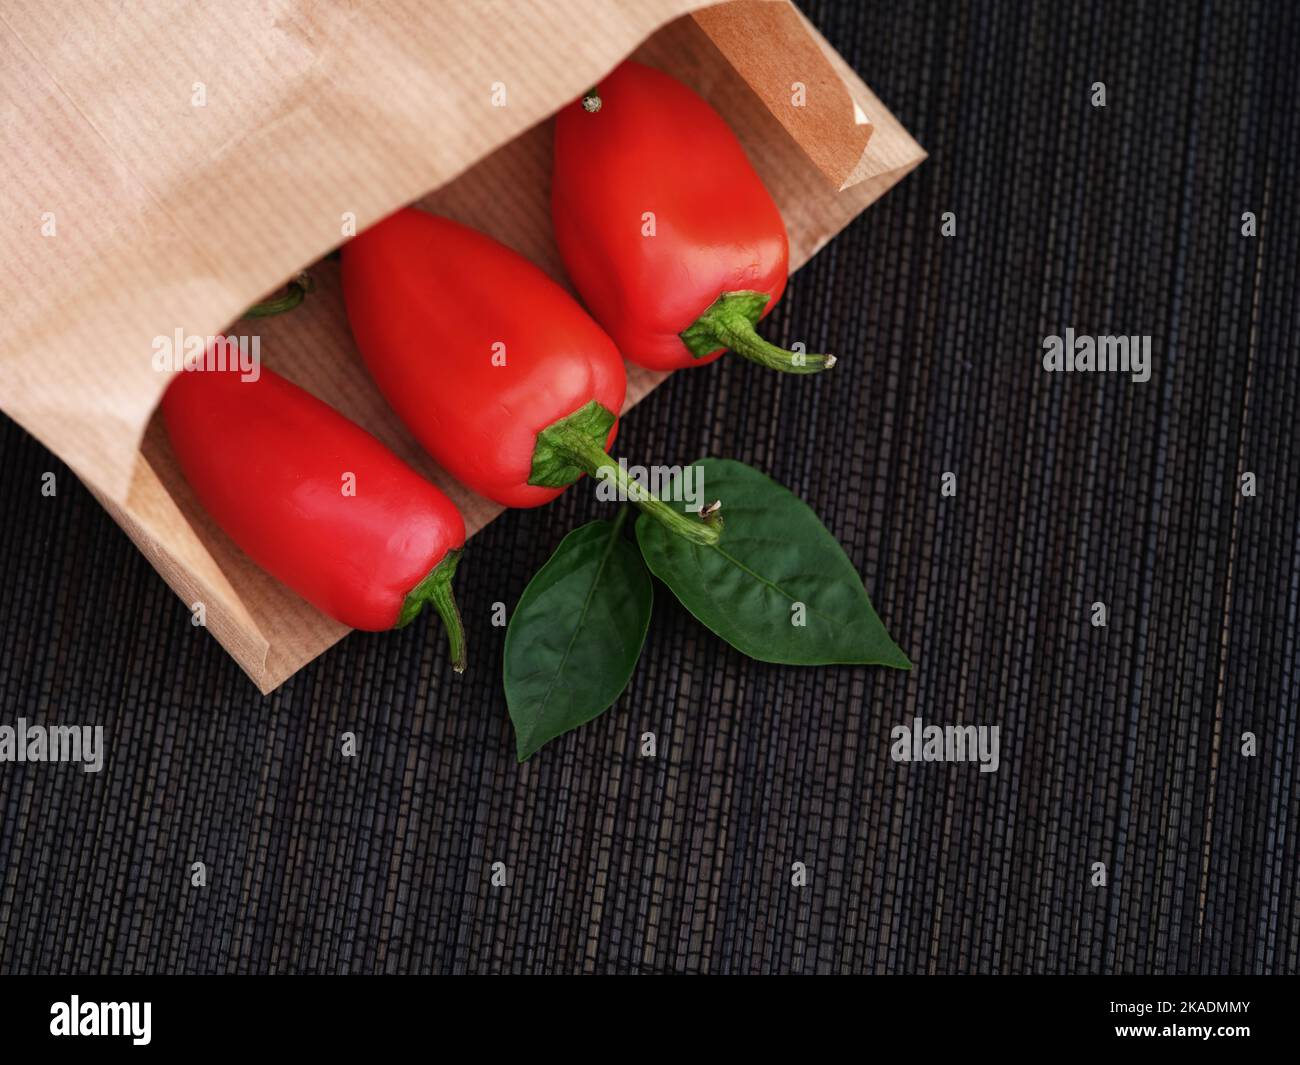 Some red bell peppers lying in a paper bag with some leaves near it. Close up. Stock Photo